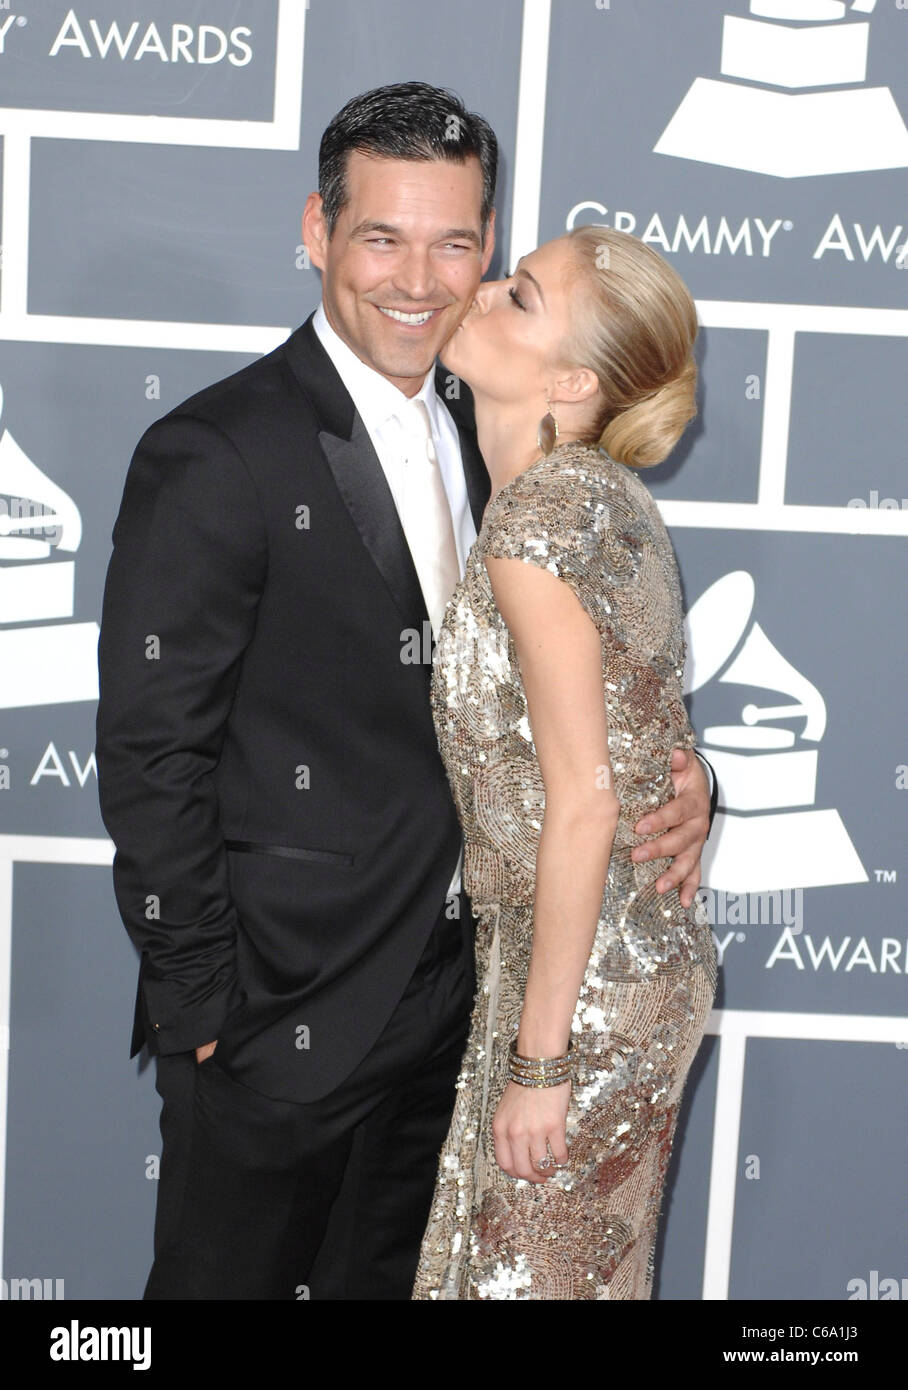 Eddie Cibrian, LeAnne Rimes at arrivals for The 53rd Annual GRAMMY Awards, Staples Center, Los Angeles, CA February 13, 2011. Photo By: Elizabeth Goodenough/Everett Collection Stock Photo